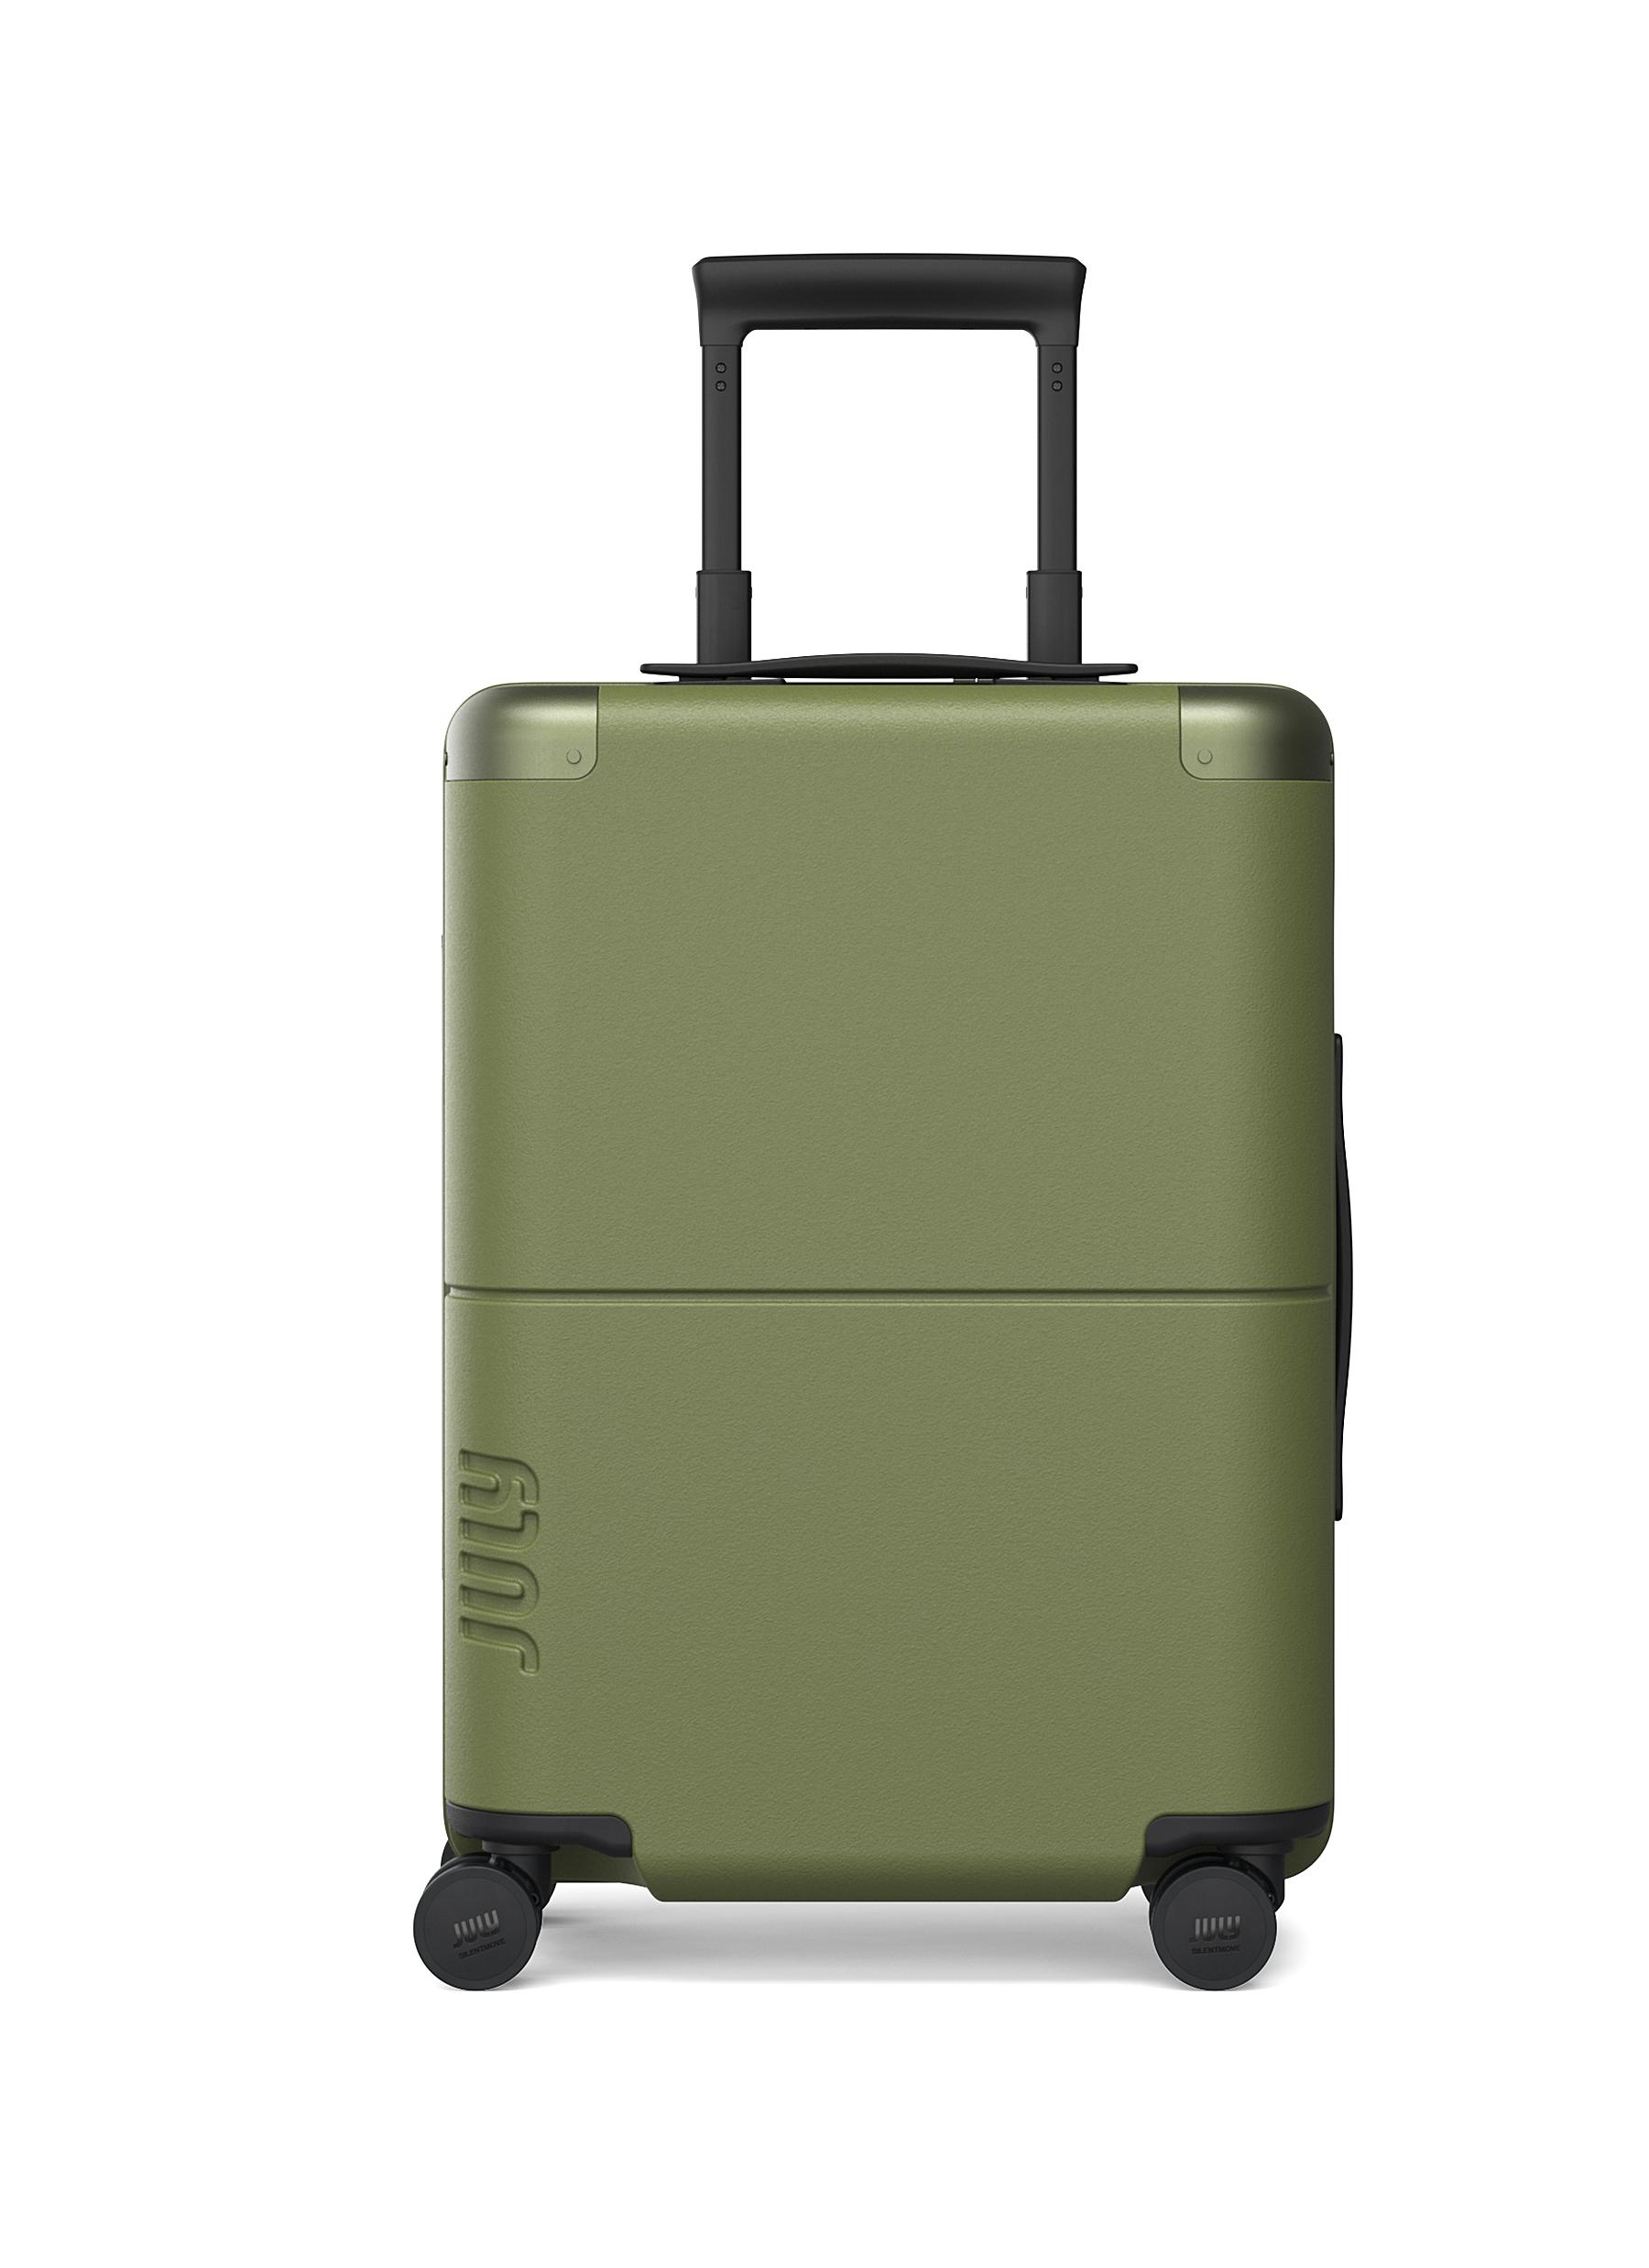 CARRY ON SUITCASE — MOSS GREEN